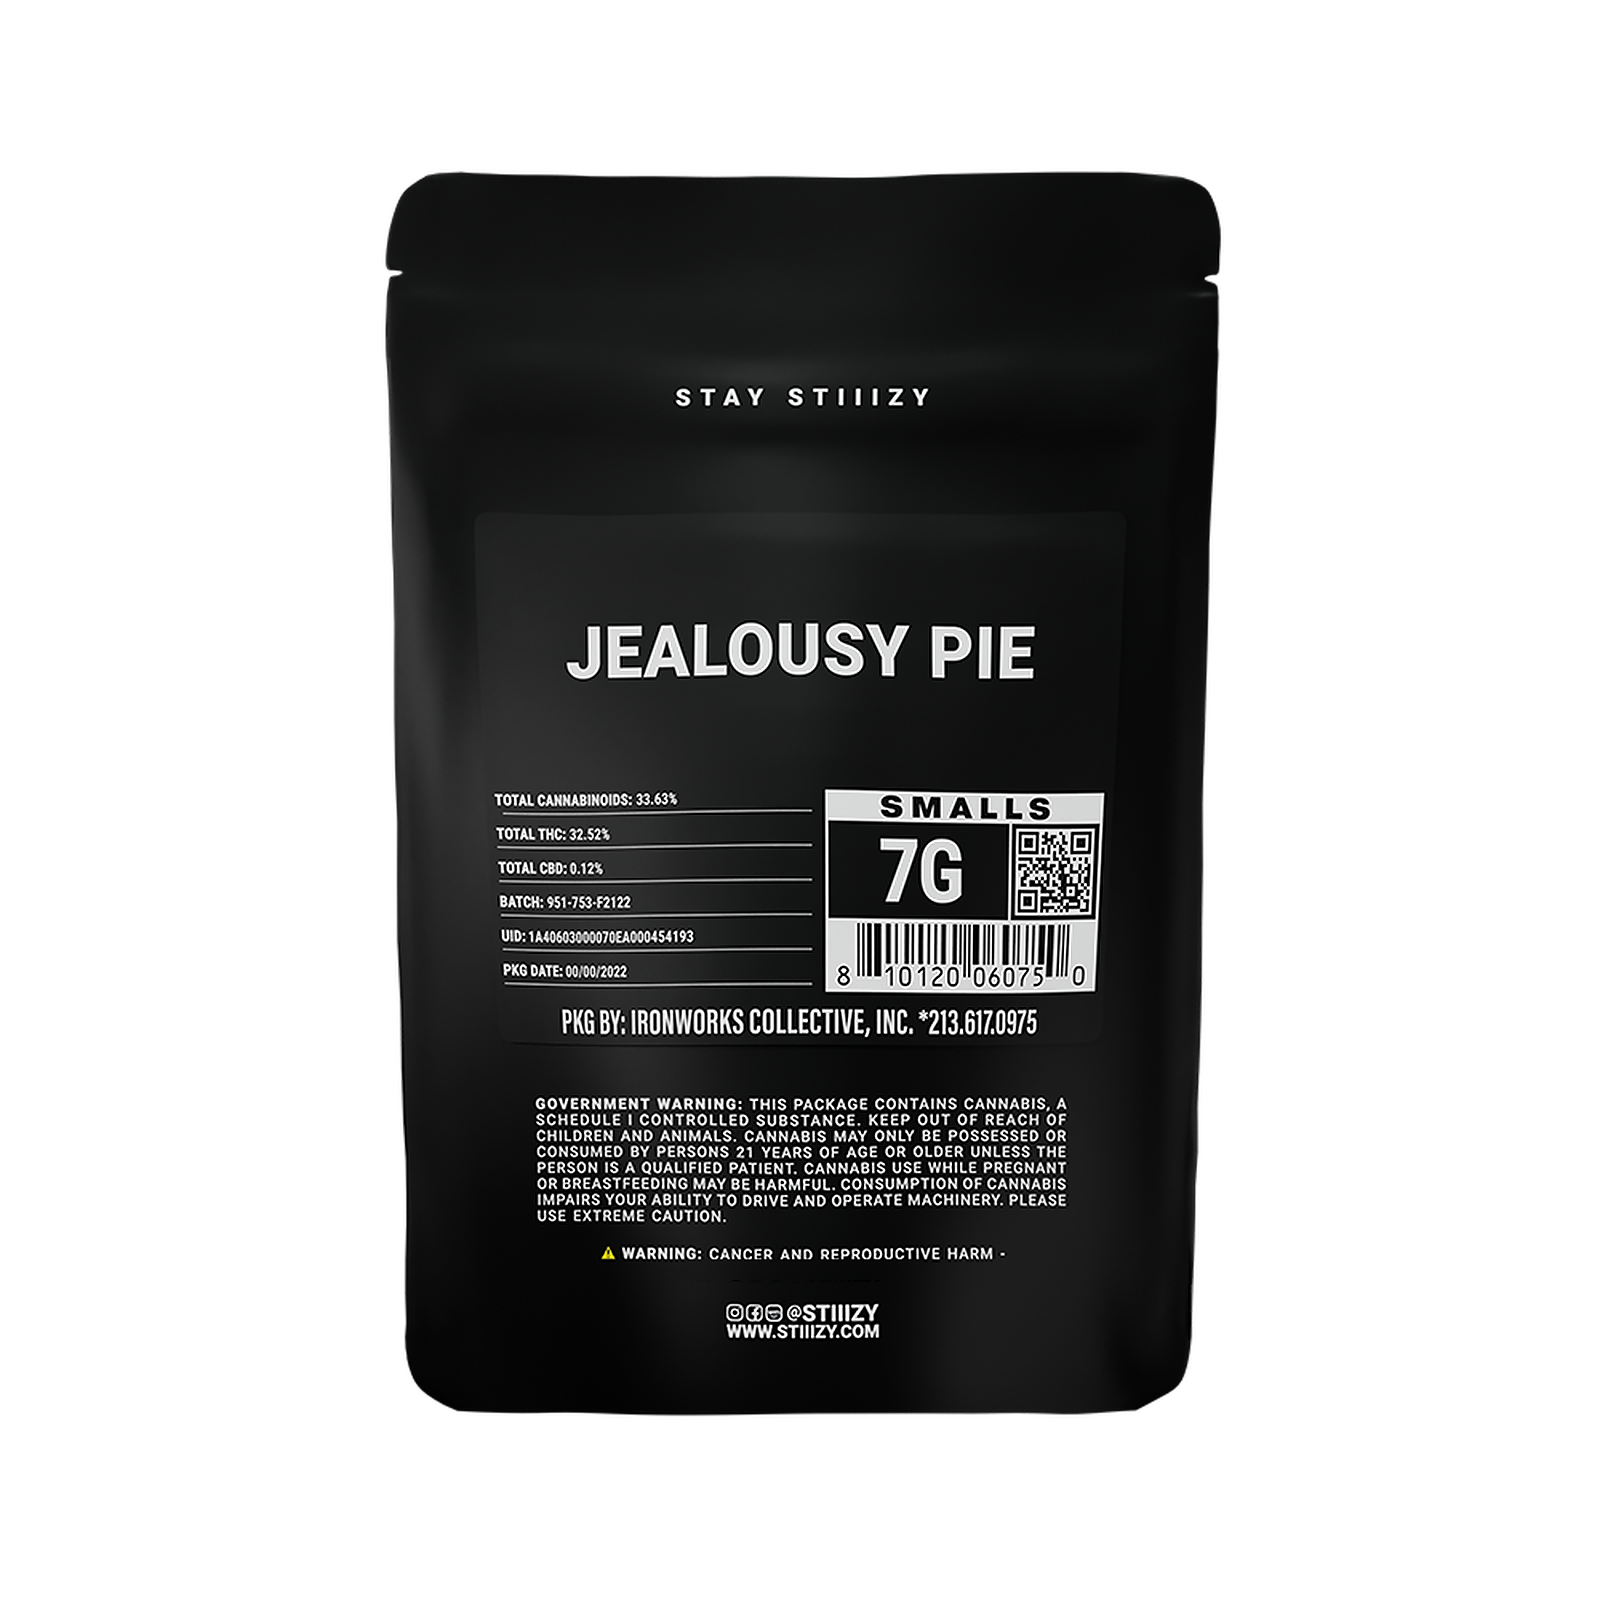 A black label bag holds 7 grams of cannabis flower from the Jealousy Pie weed strain.